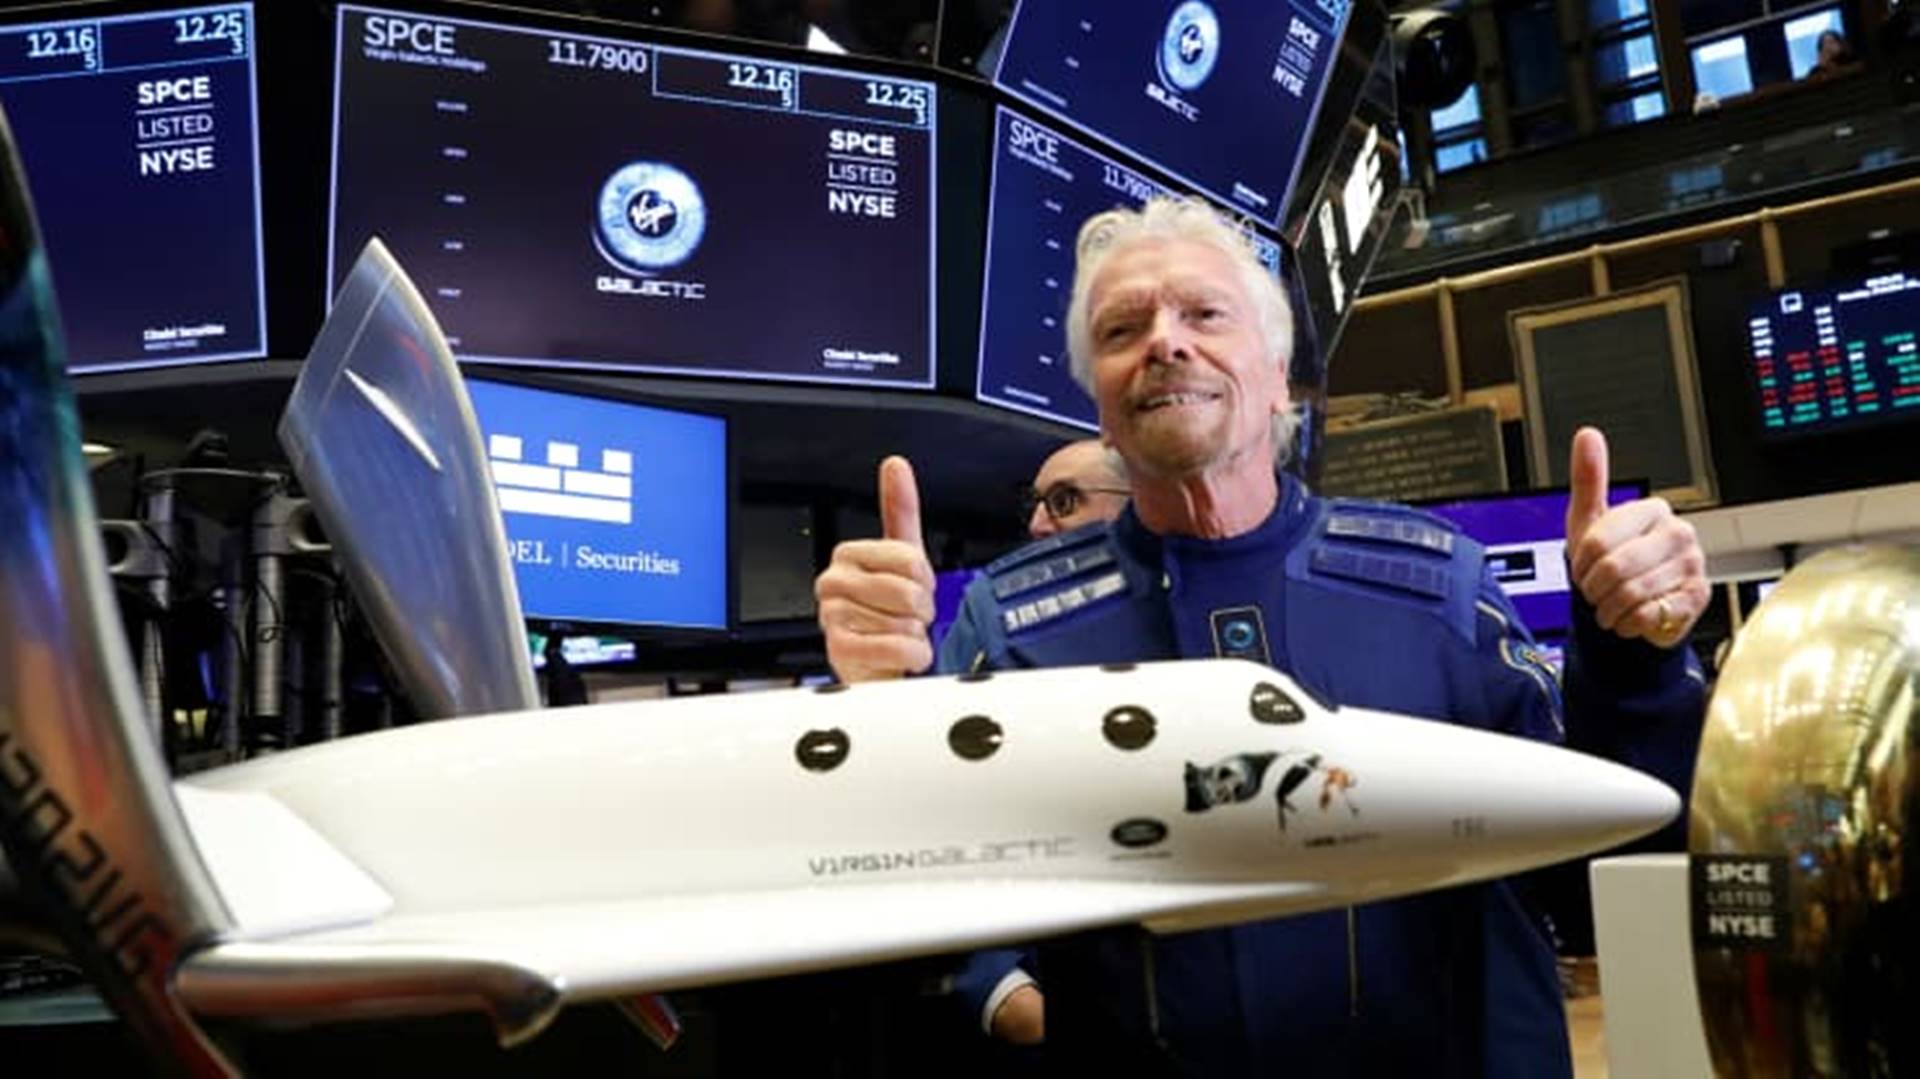 Virgin Galactic completes first spaceflight in over two years, in a step toward finishing development